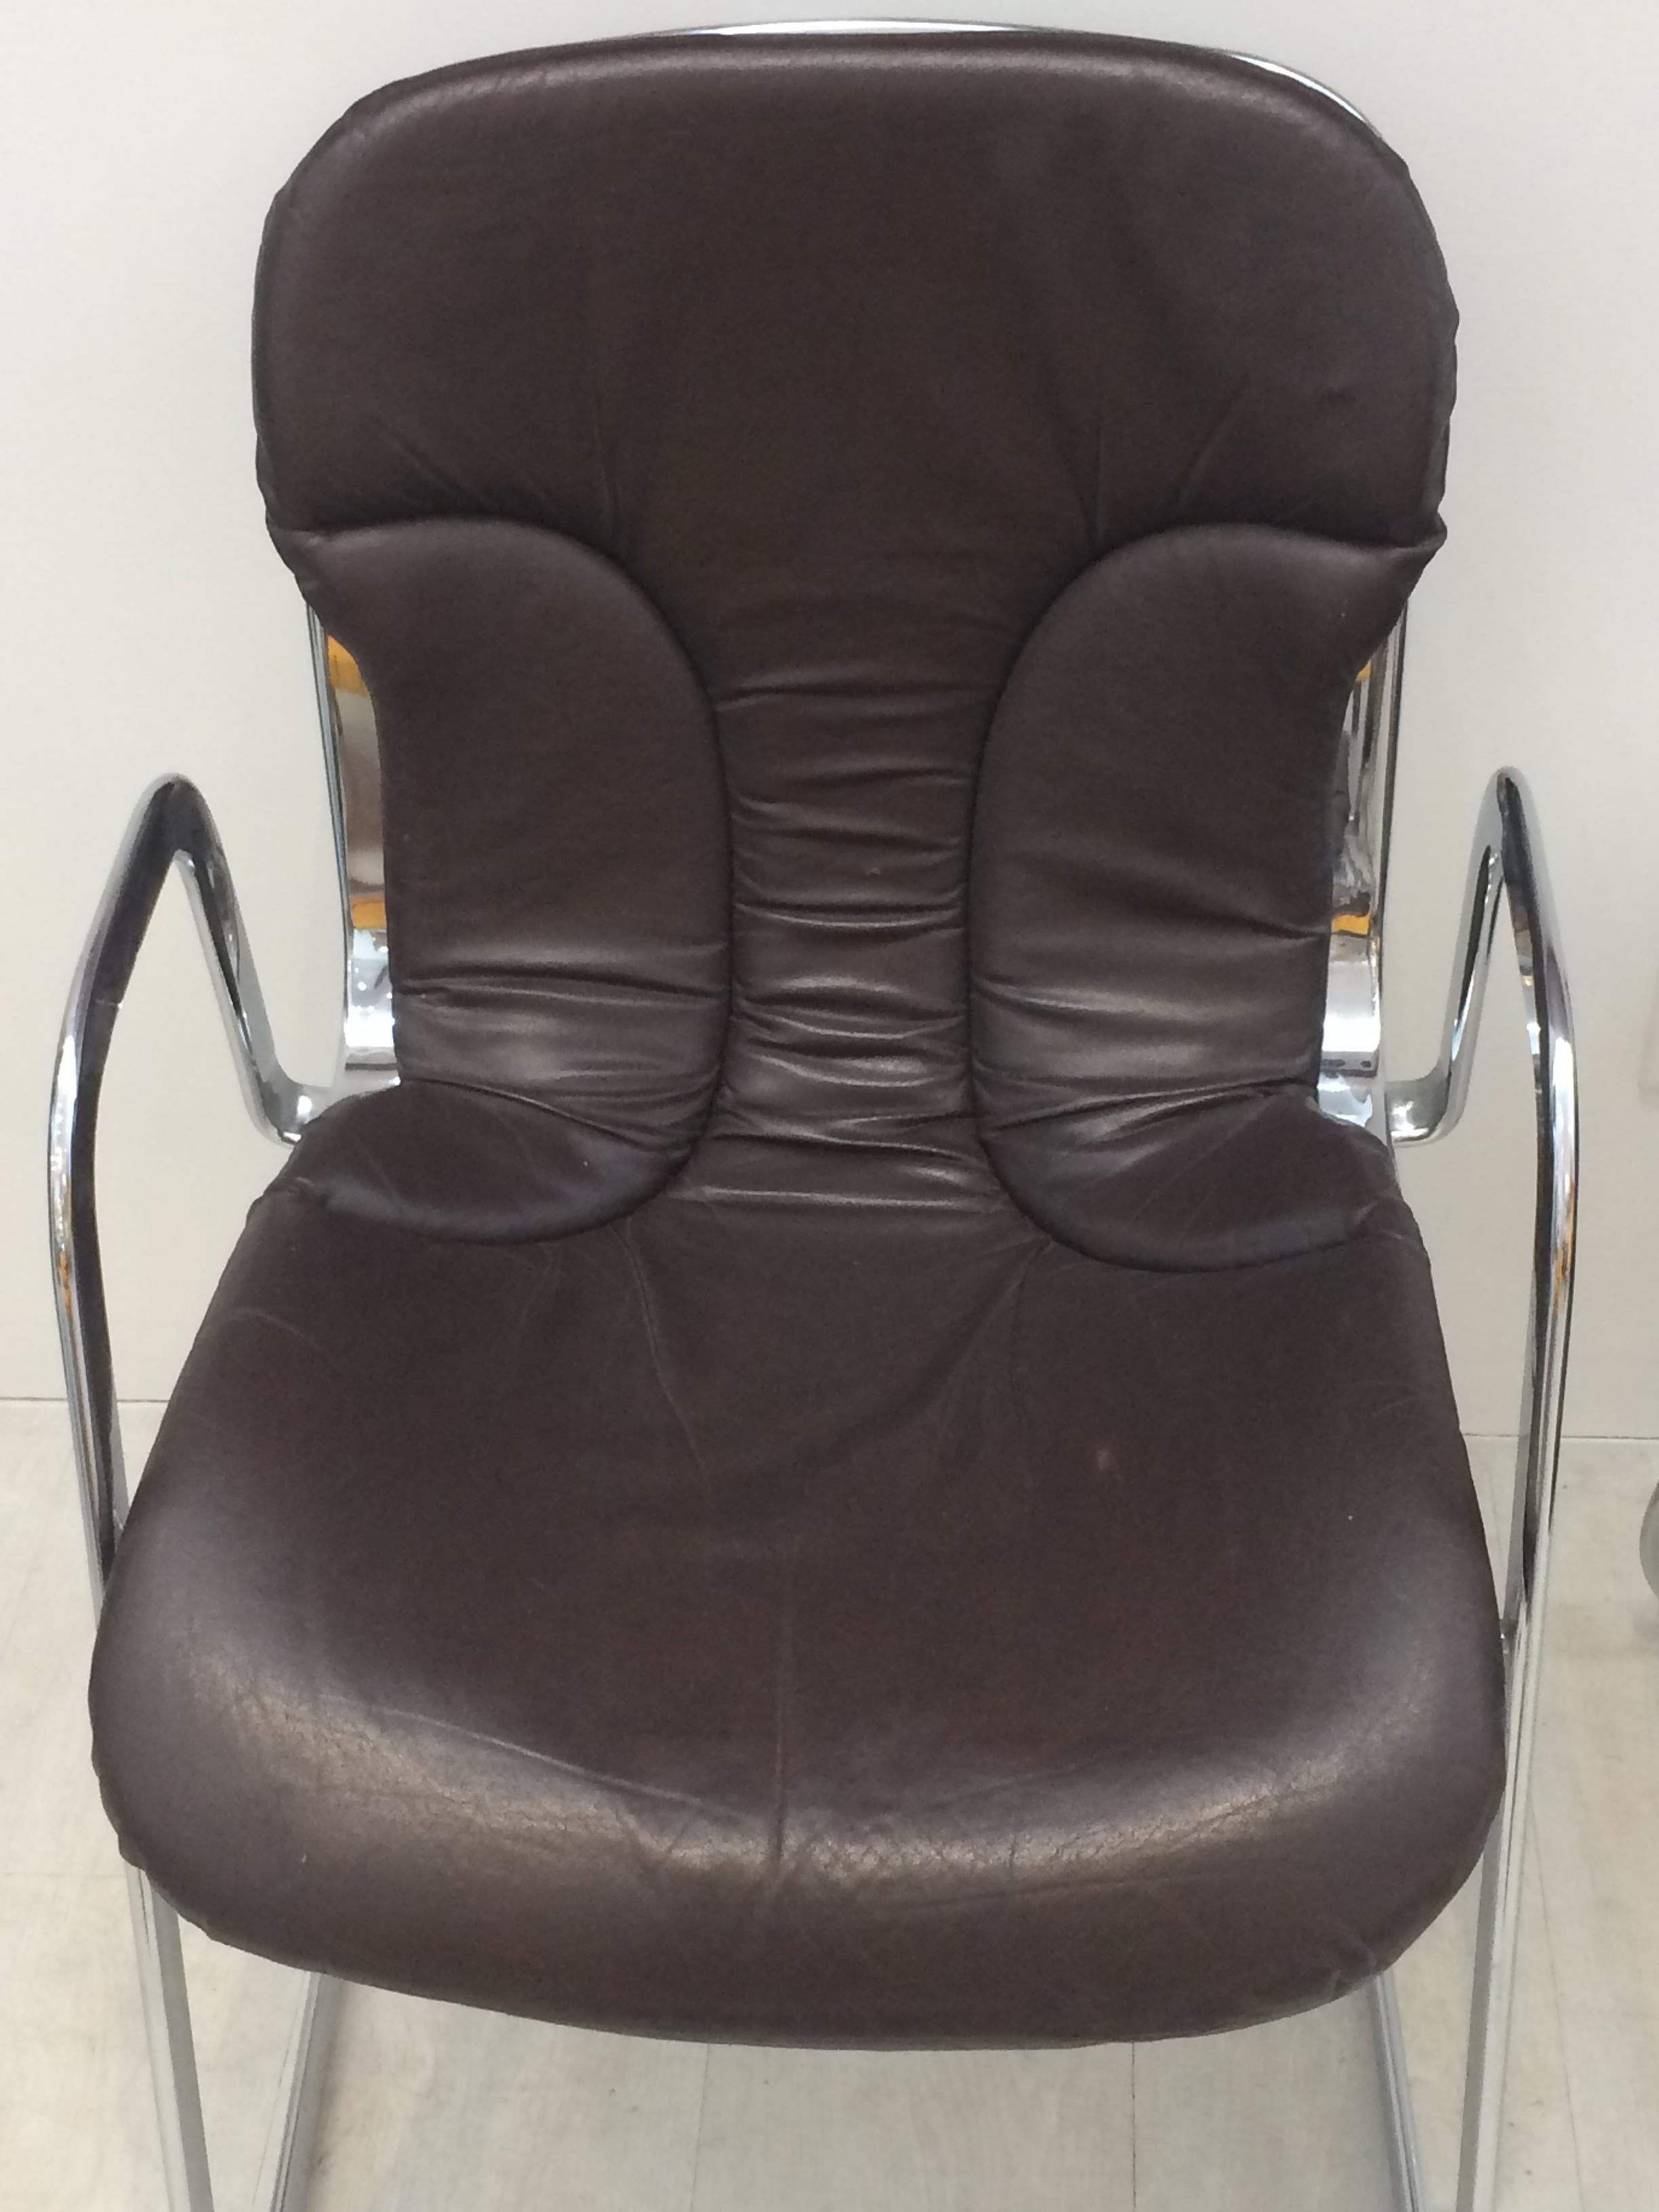 Vintage Willy Rizzo chrome dining chair. Dining or office chair with leather cushion. Very comfortable chairs well designed in that regard. Light airy chairs but still very solid construction. Leather and chrome are both in very good condition.